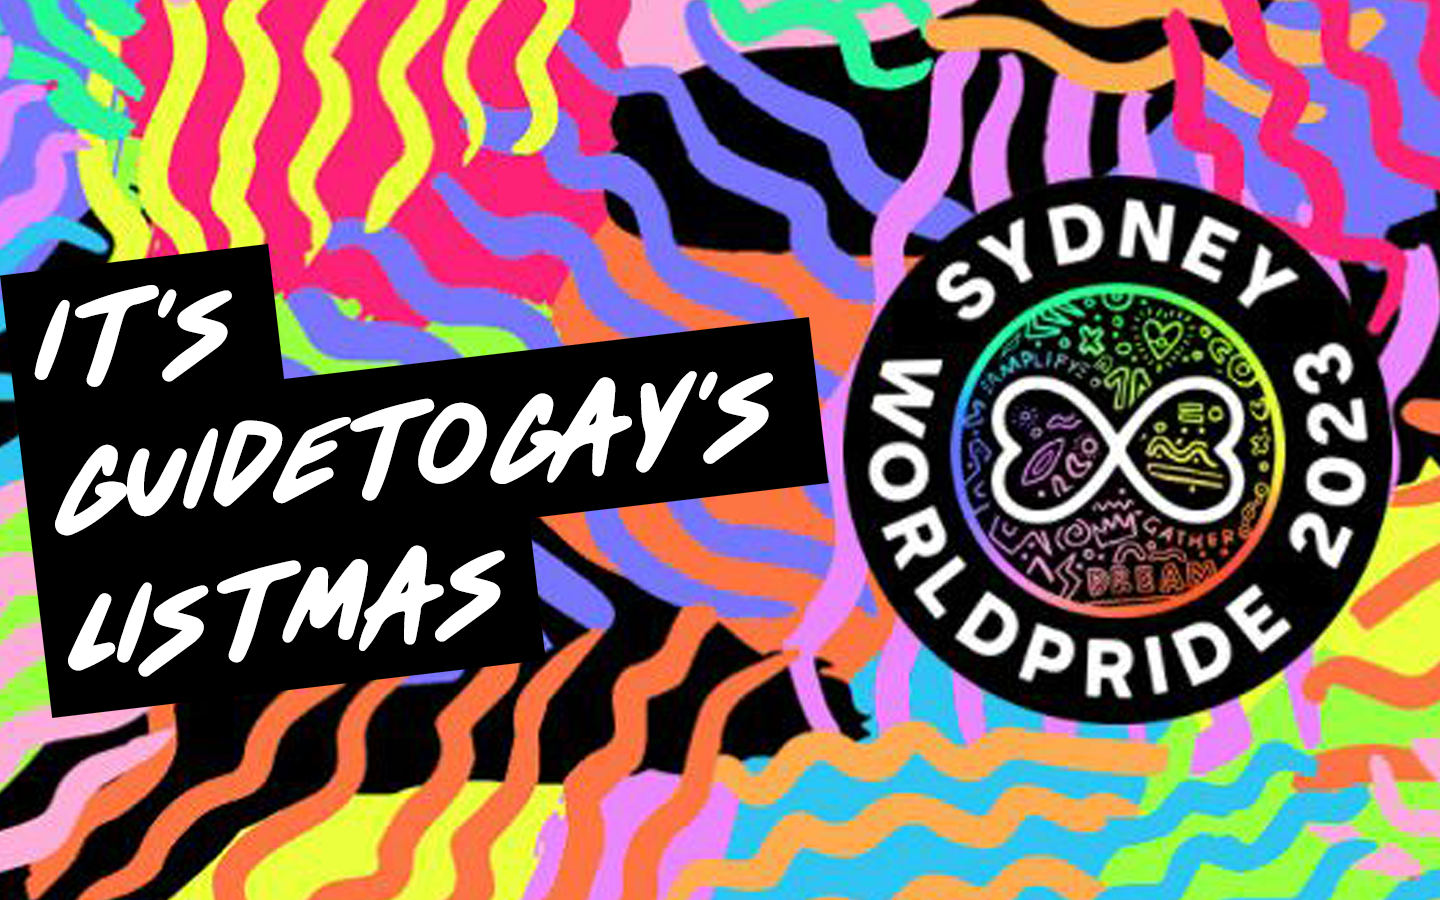 It’s “Listmas” – 12 Days of Sydney World Pride must haves for your stocking stuffers.